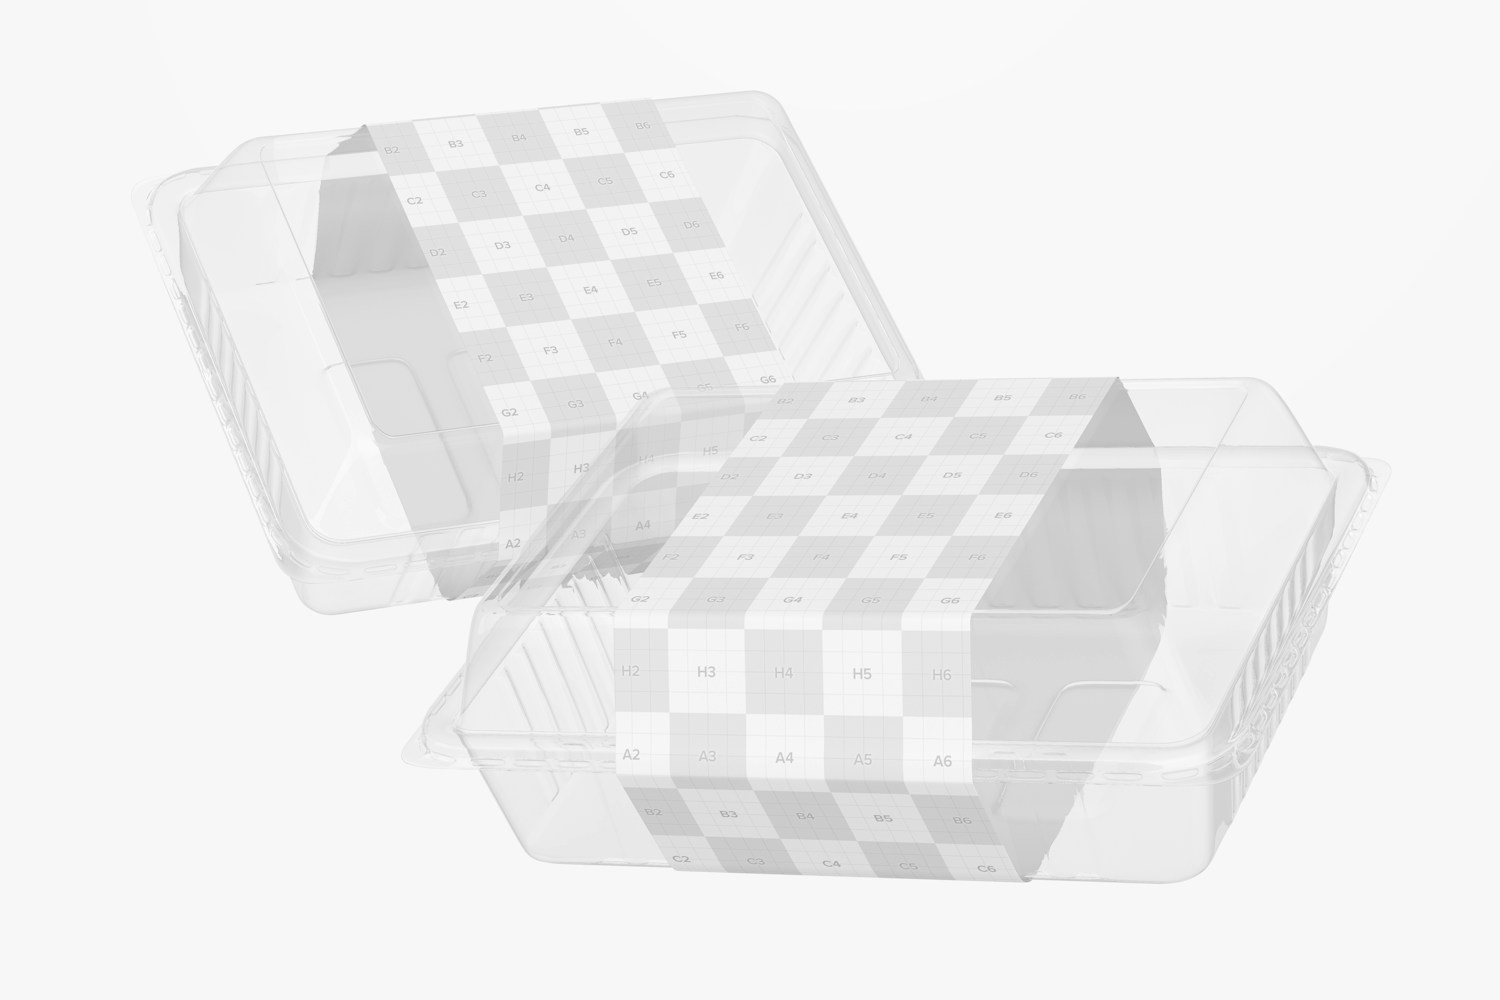 Clear Food Tray Boxes Mockup, Floating